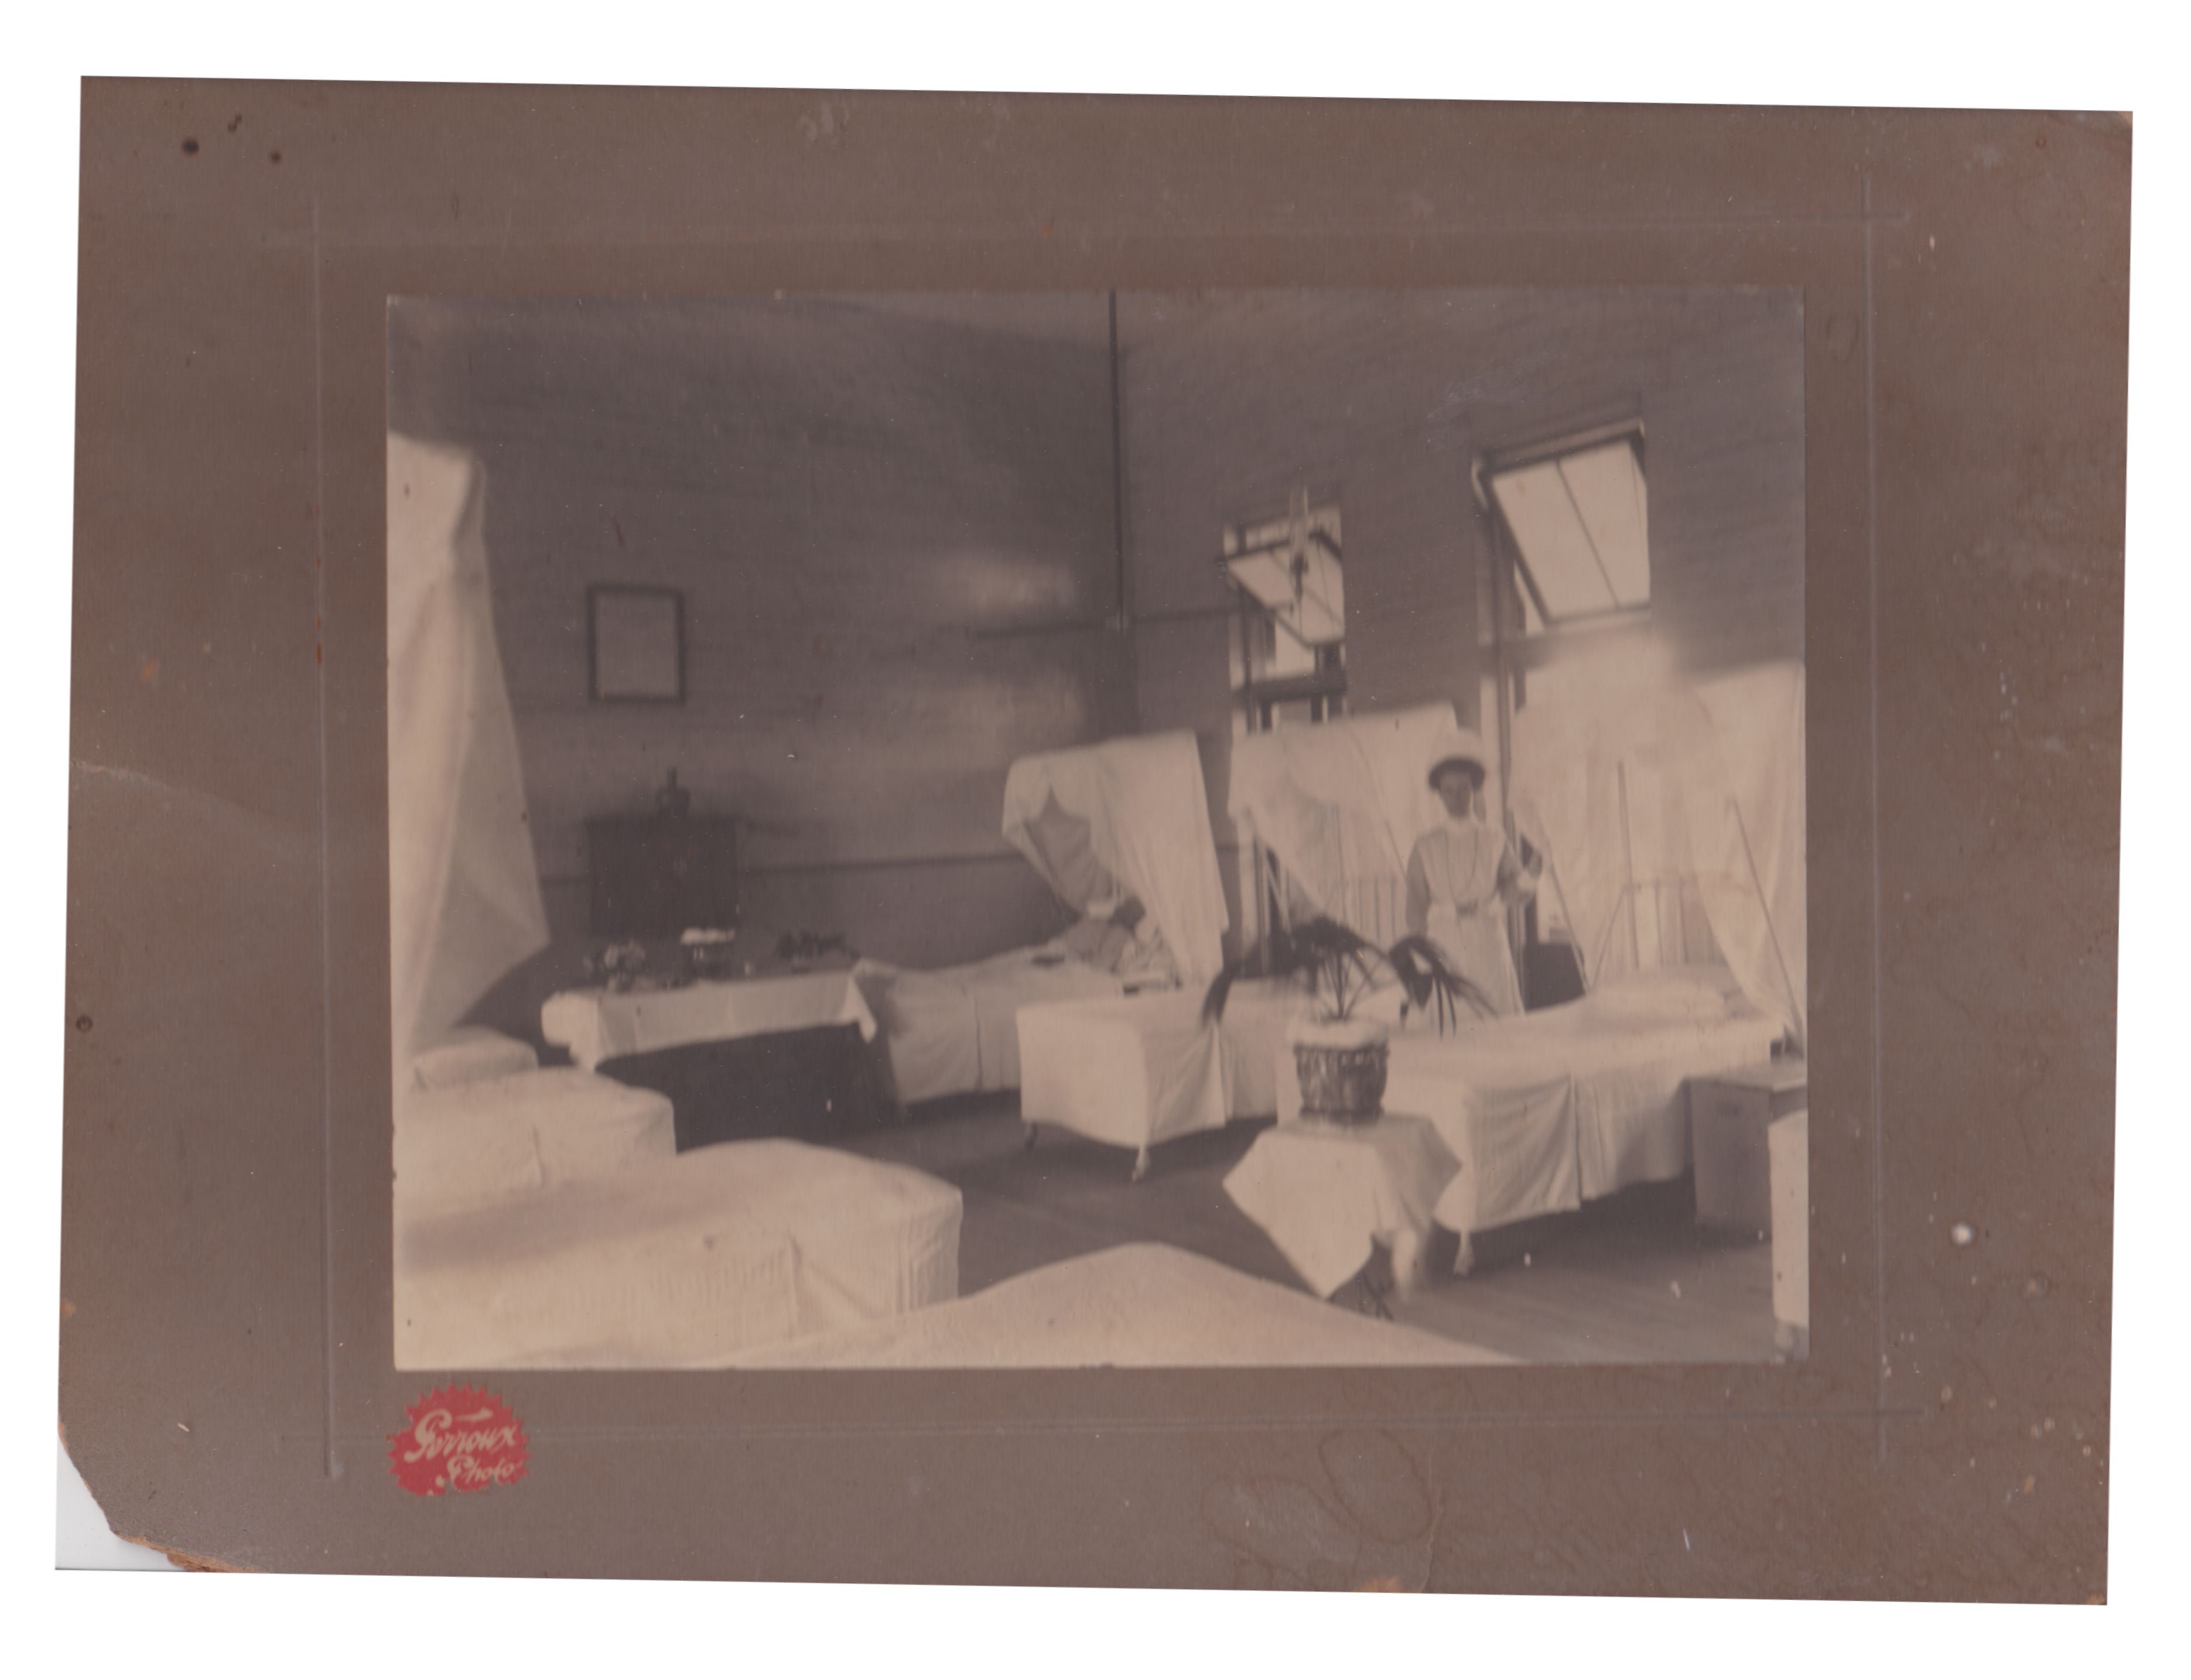 Black and white photograph of a ward inside Rockhampton General Hospital.  The room has high ceilings, and french doors, with open fanlight windows above them.  Seven beds are visible in the image, but there were probably more.  Each bed has a mosquito net.  There is a potted plant in the room, a picture on the wall, and what appears to be a sideboard against the wall with vases of flowers on it.  One patient lies in the far bed, and a nurse stands nearby.